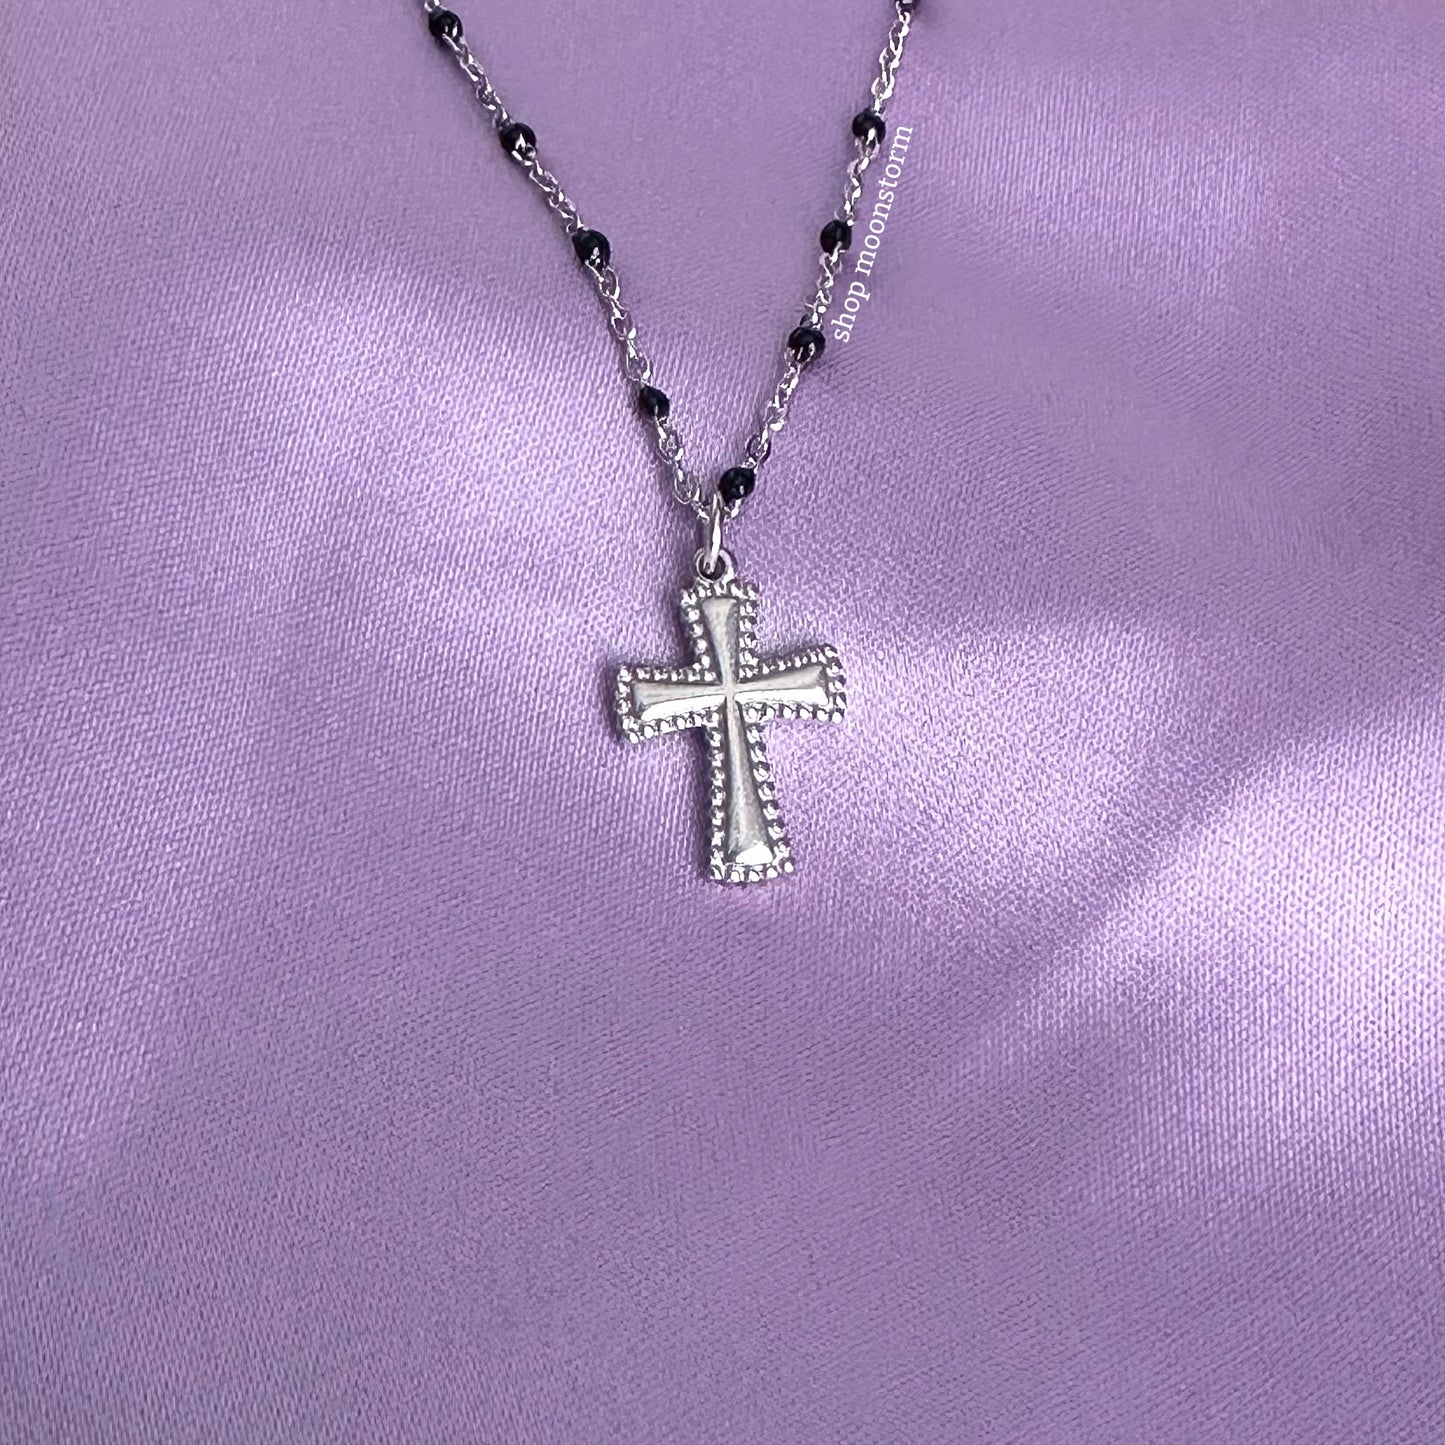 Holy Grail Cross Beaded Necklace